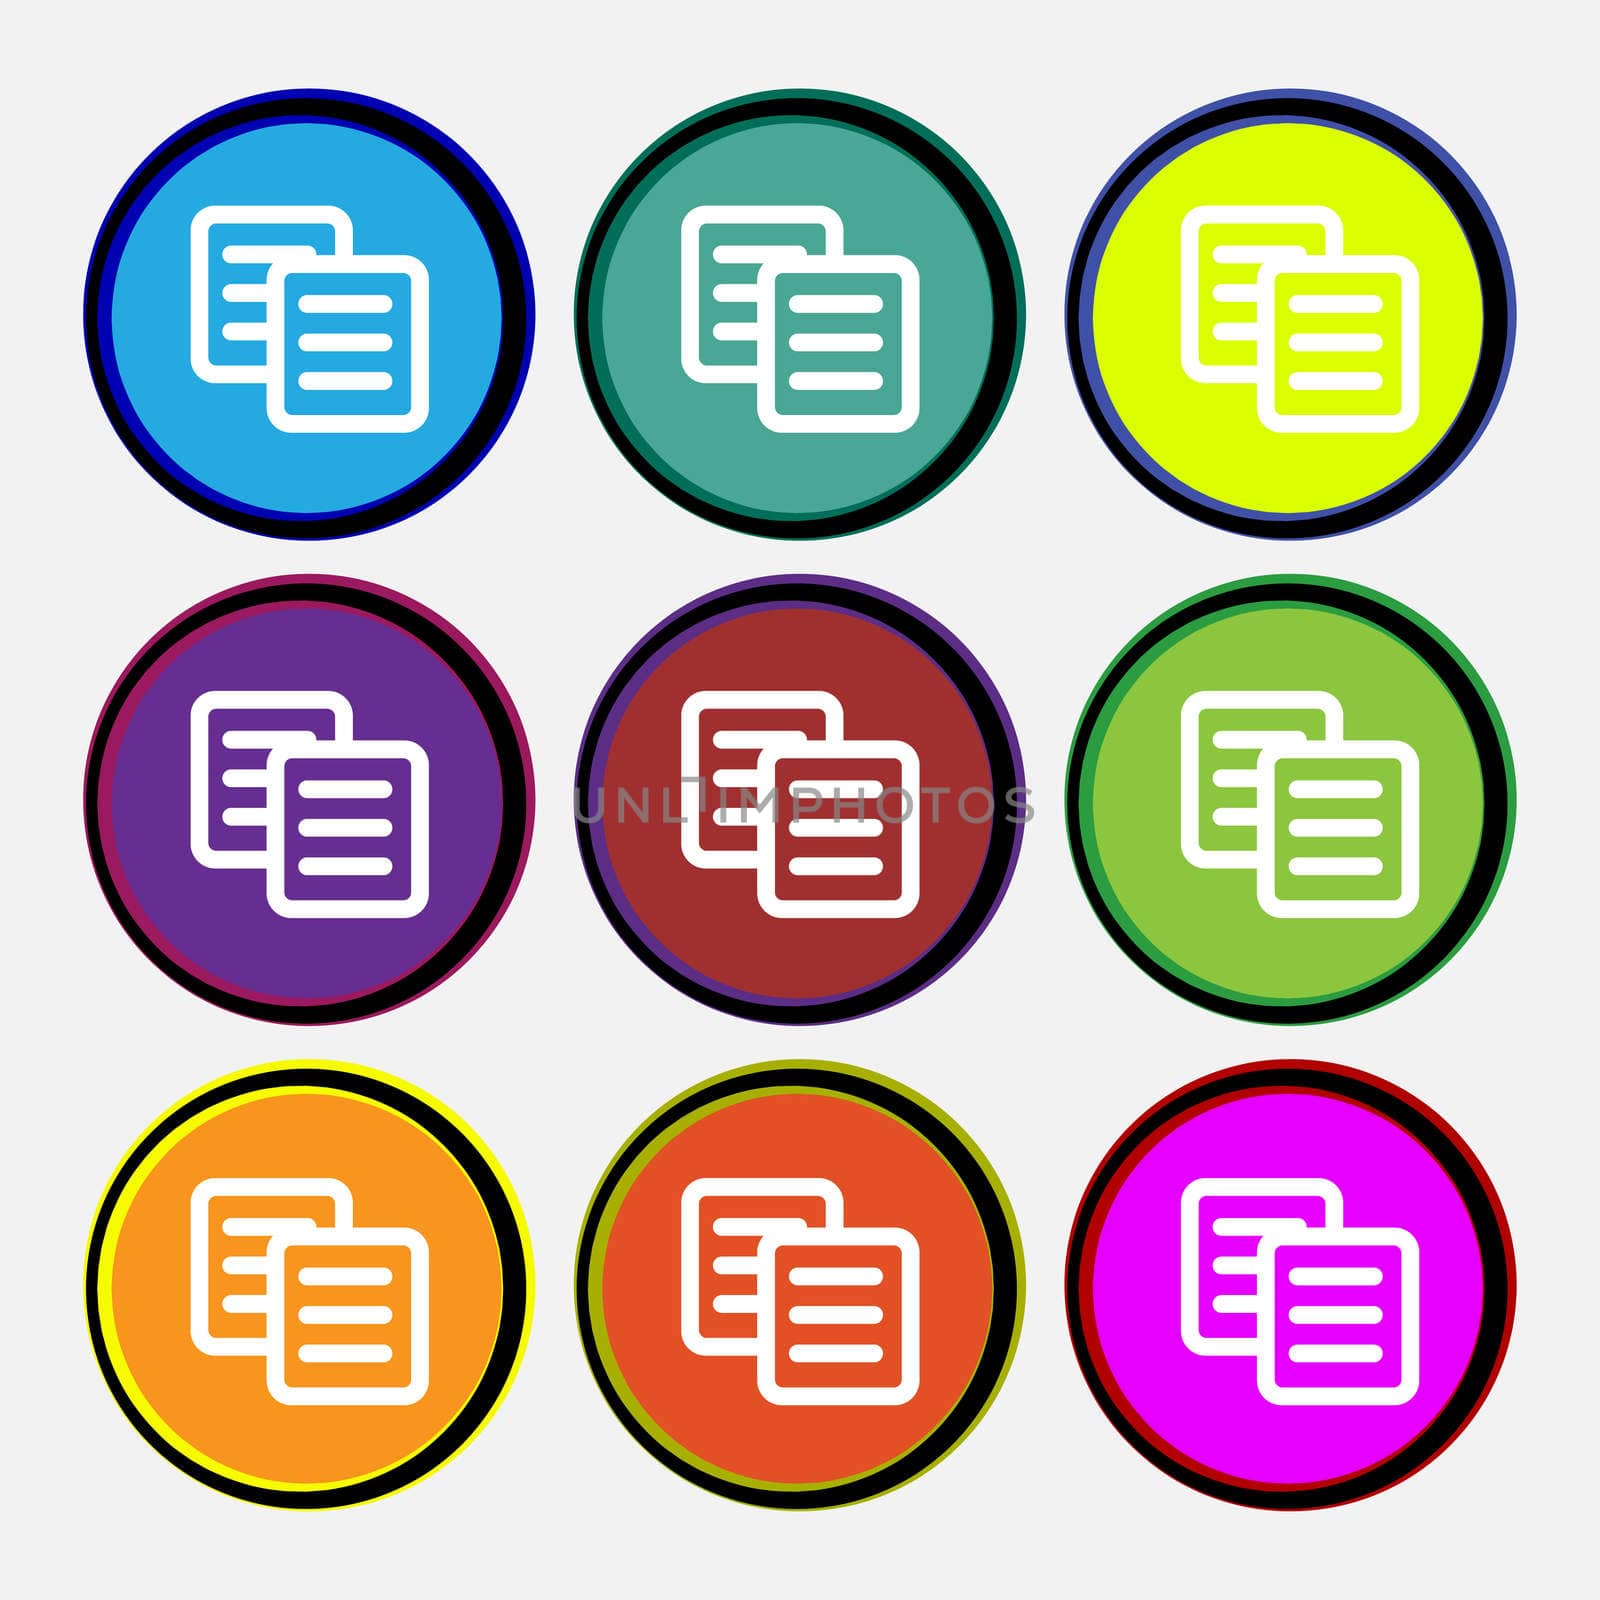 copy icon sign. Nine multi colored round buttons. illustration